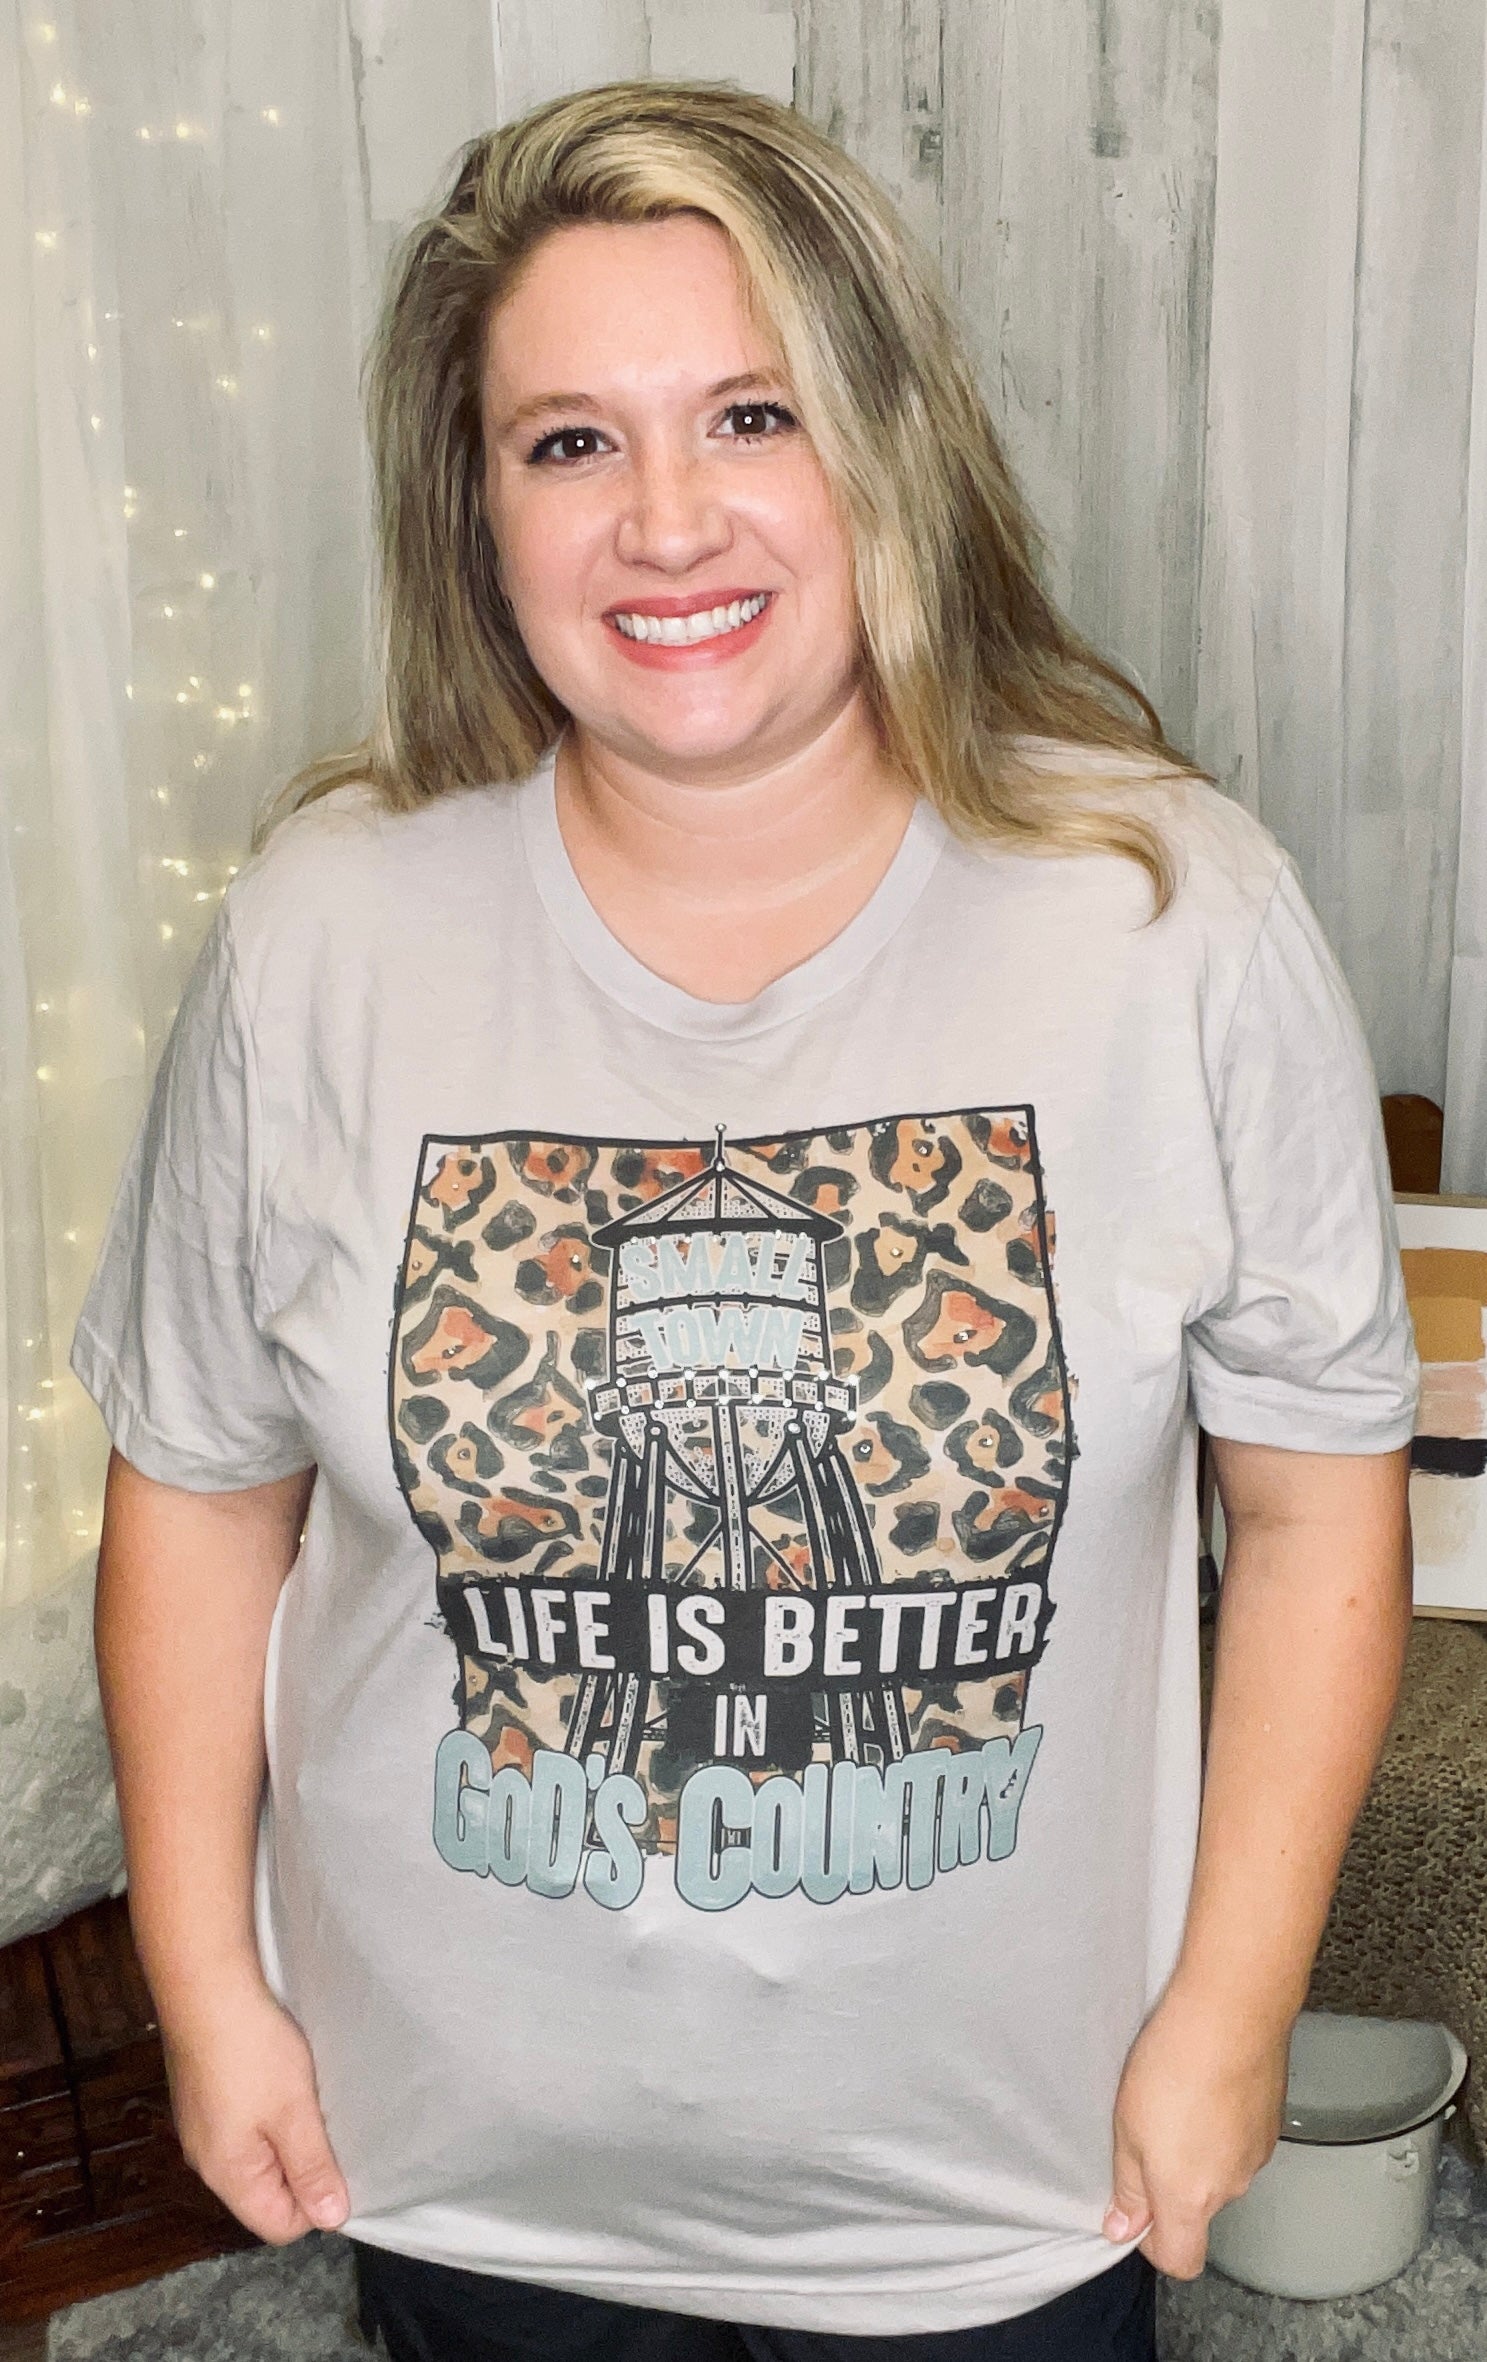 Product details  Custom sublimated tee that reads “Life is Better in a Small Town" Pressed on a Bella Canva shirt Short sleeve  Fits true to size Contact us about a custom color shirt.   *Colors may vary slightly due to monitor resolution and lighting* Southern Bliss Boutique